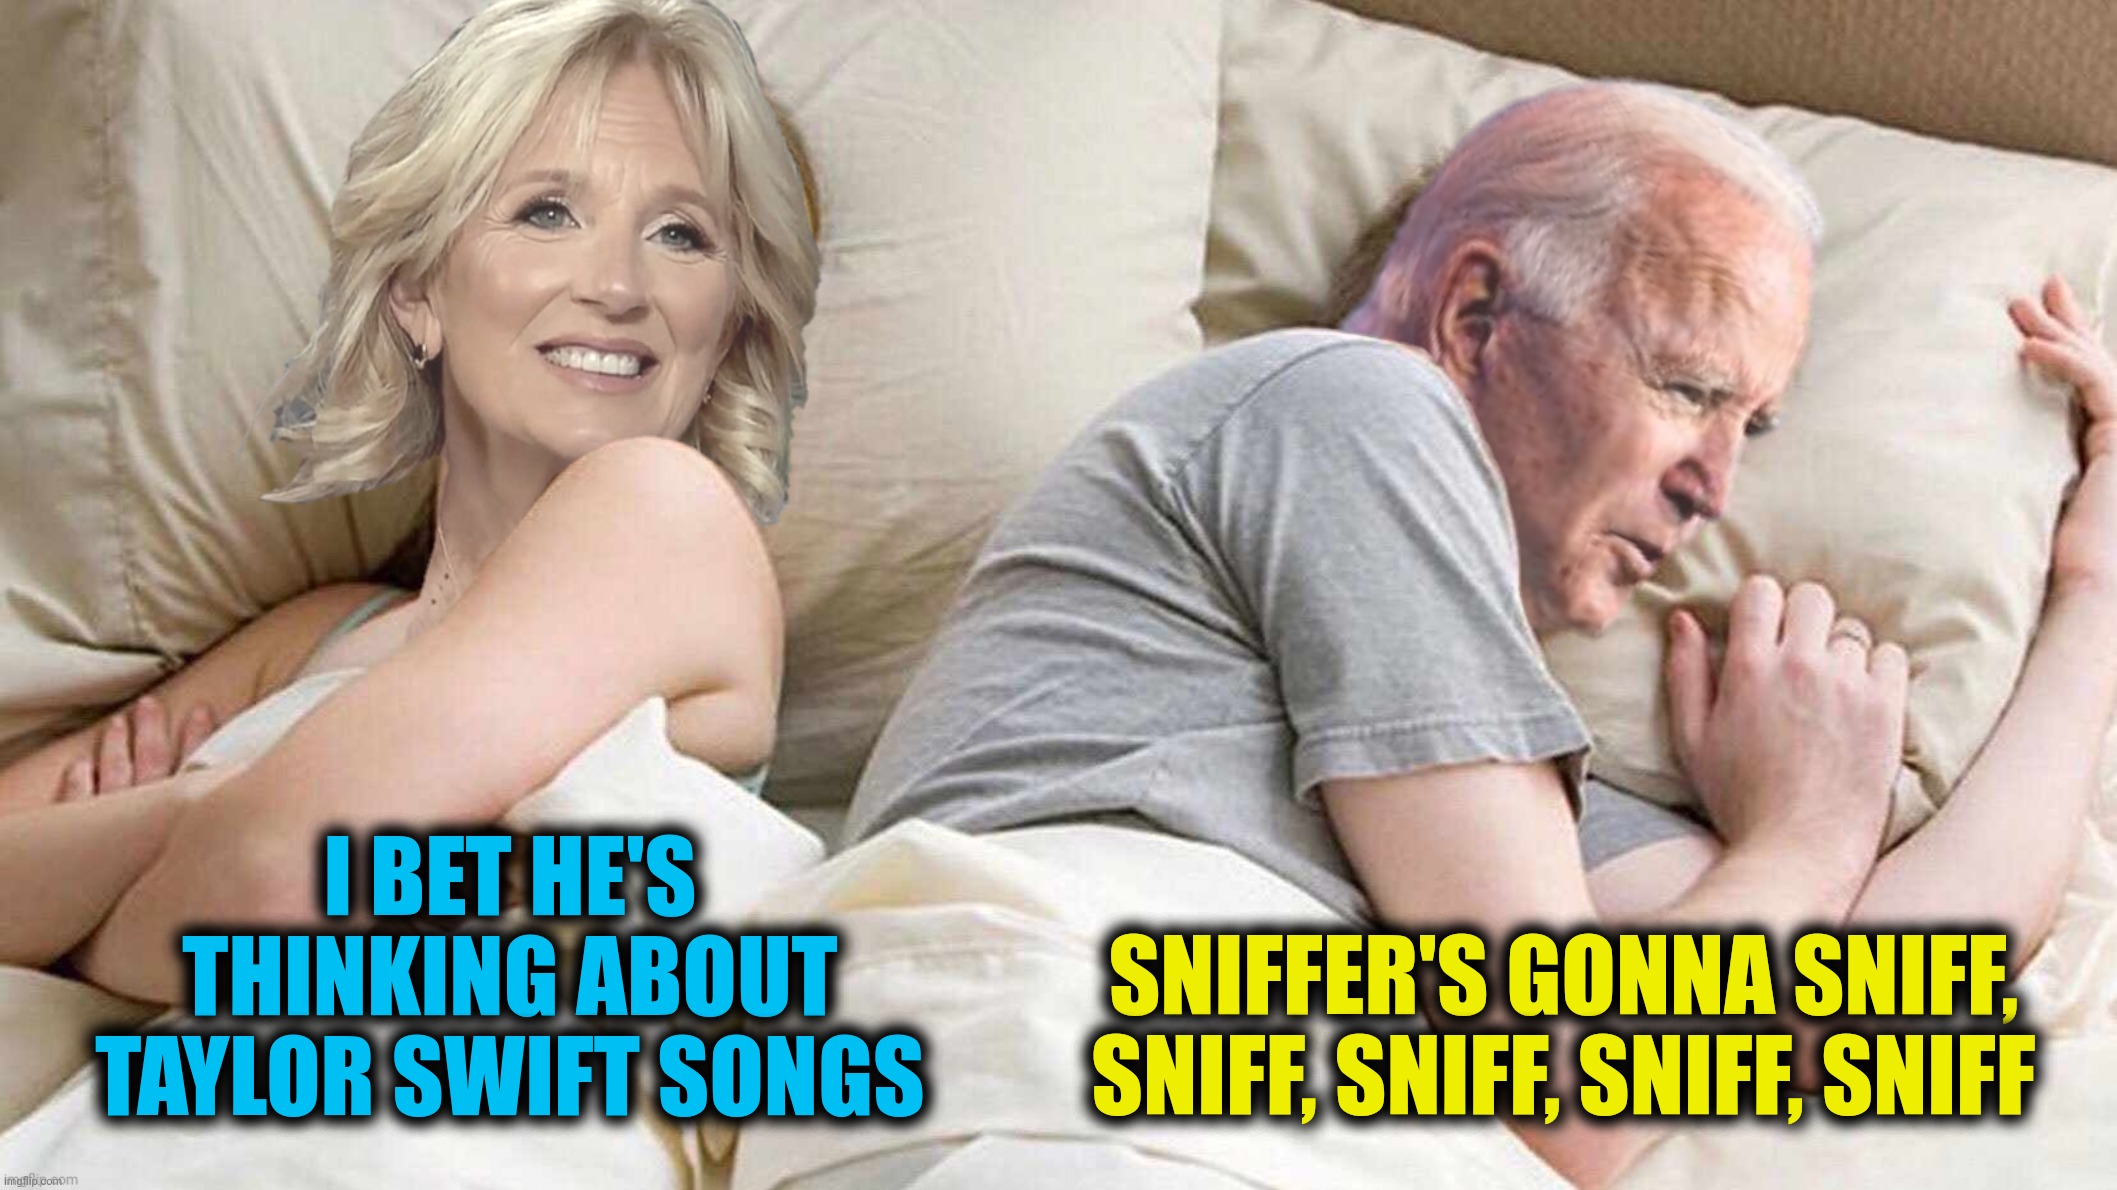 I BET HE'S THINKING ABOUT TAYLOR SWIFT SONGS SNIFFER'S GONNA SNIFF, SNIFF, SNIFF, SNIFF, SNIFF | made w/ Imgflip meme maker